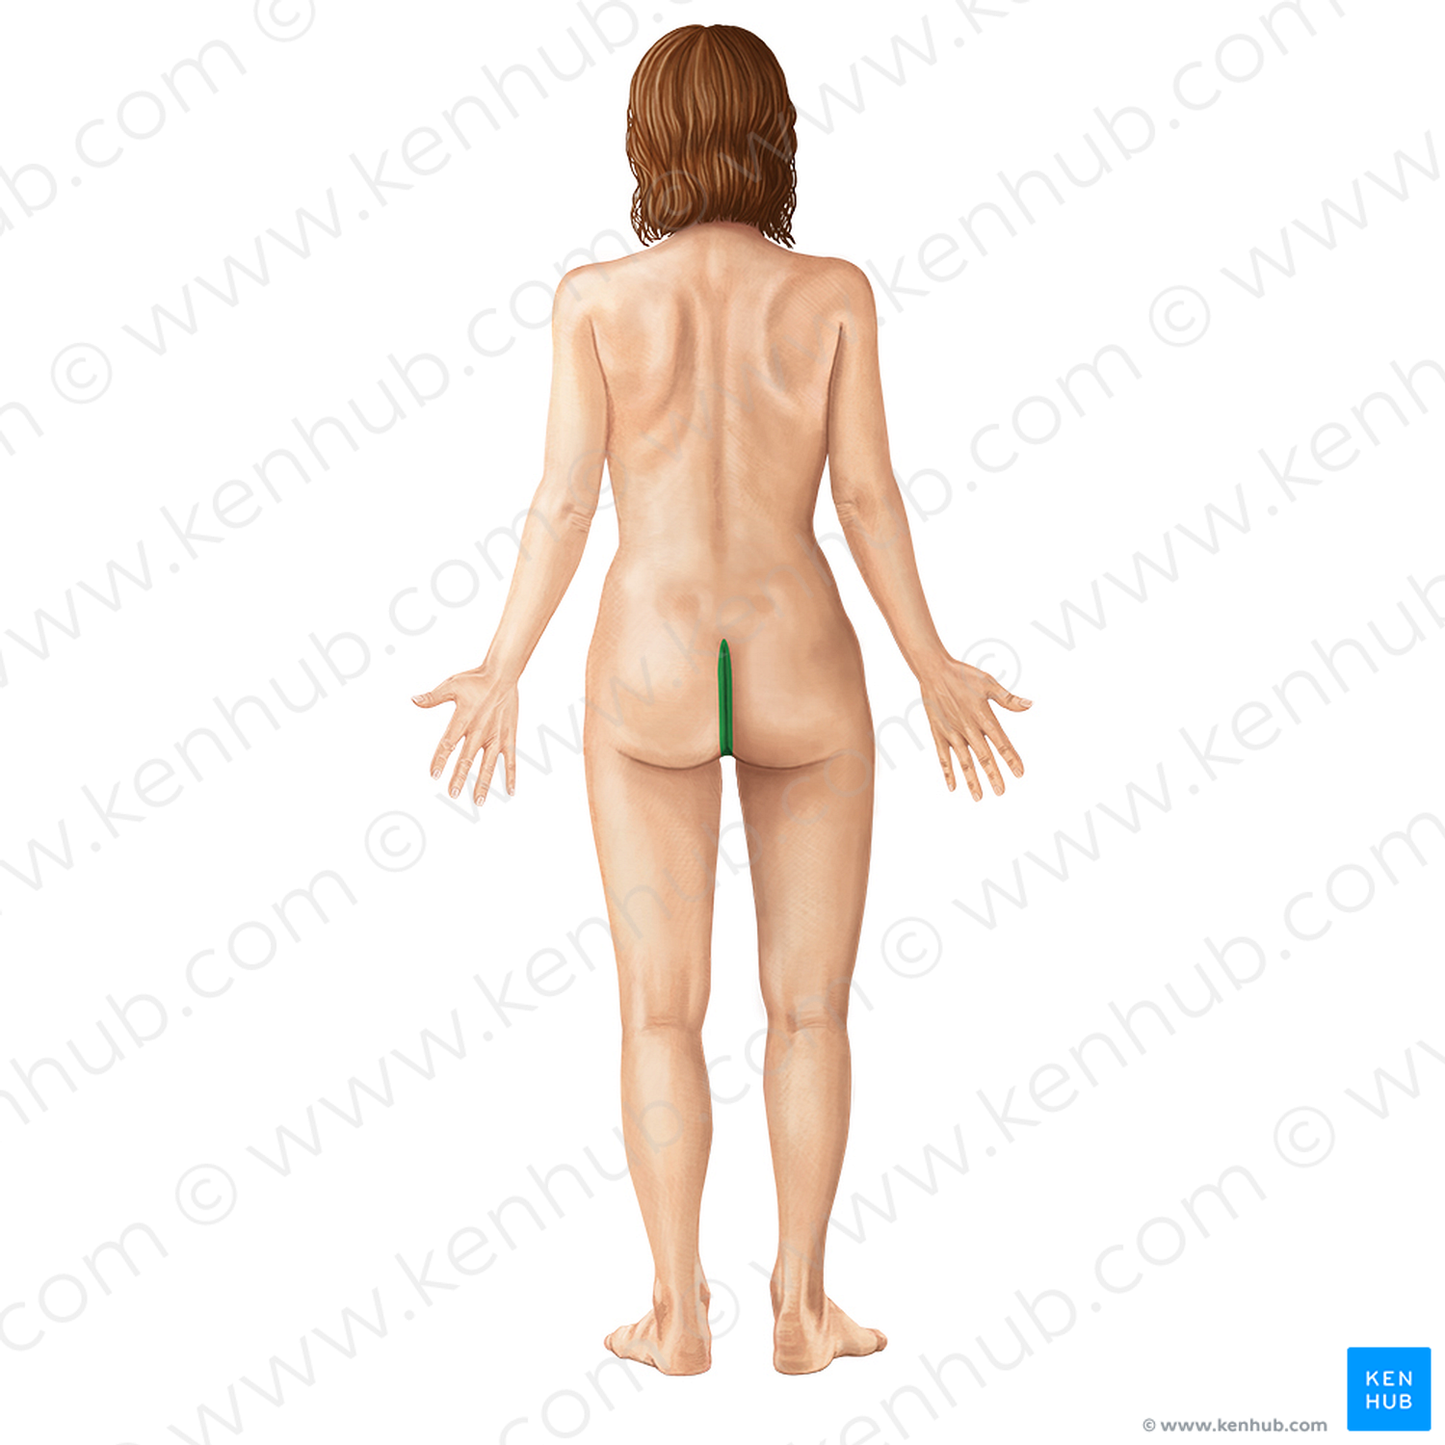 Intergluteal cleft (#3089)